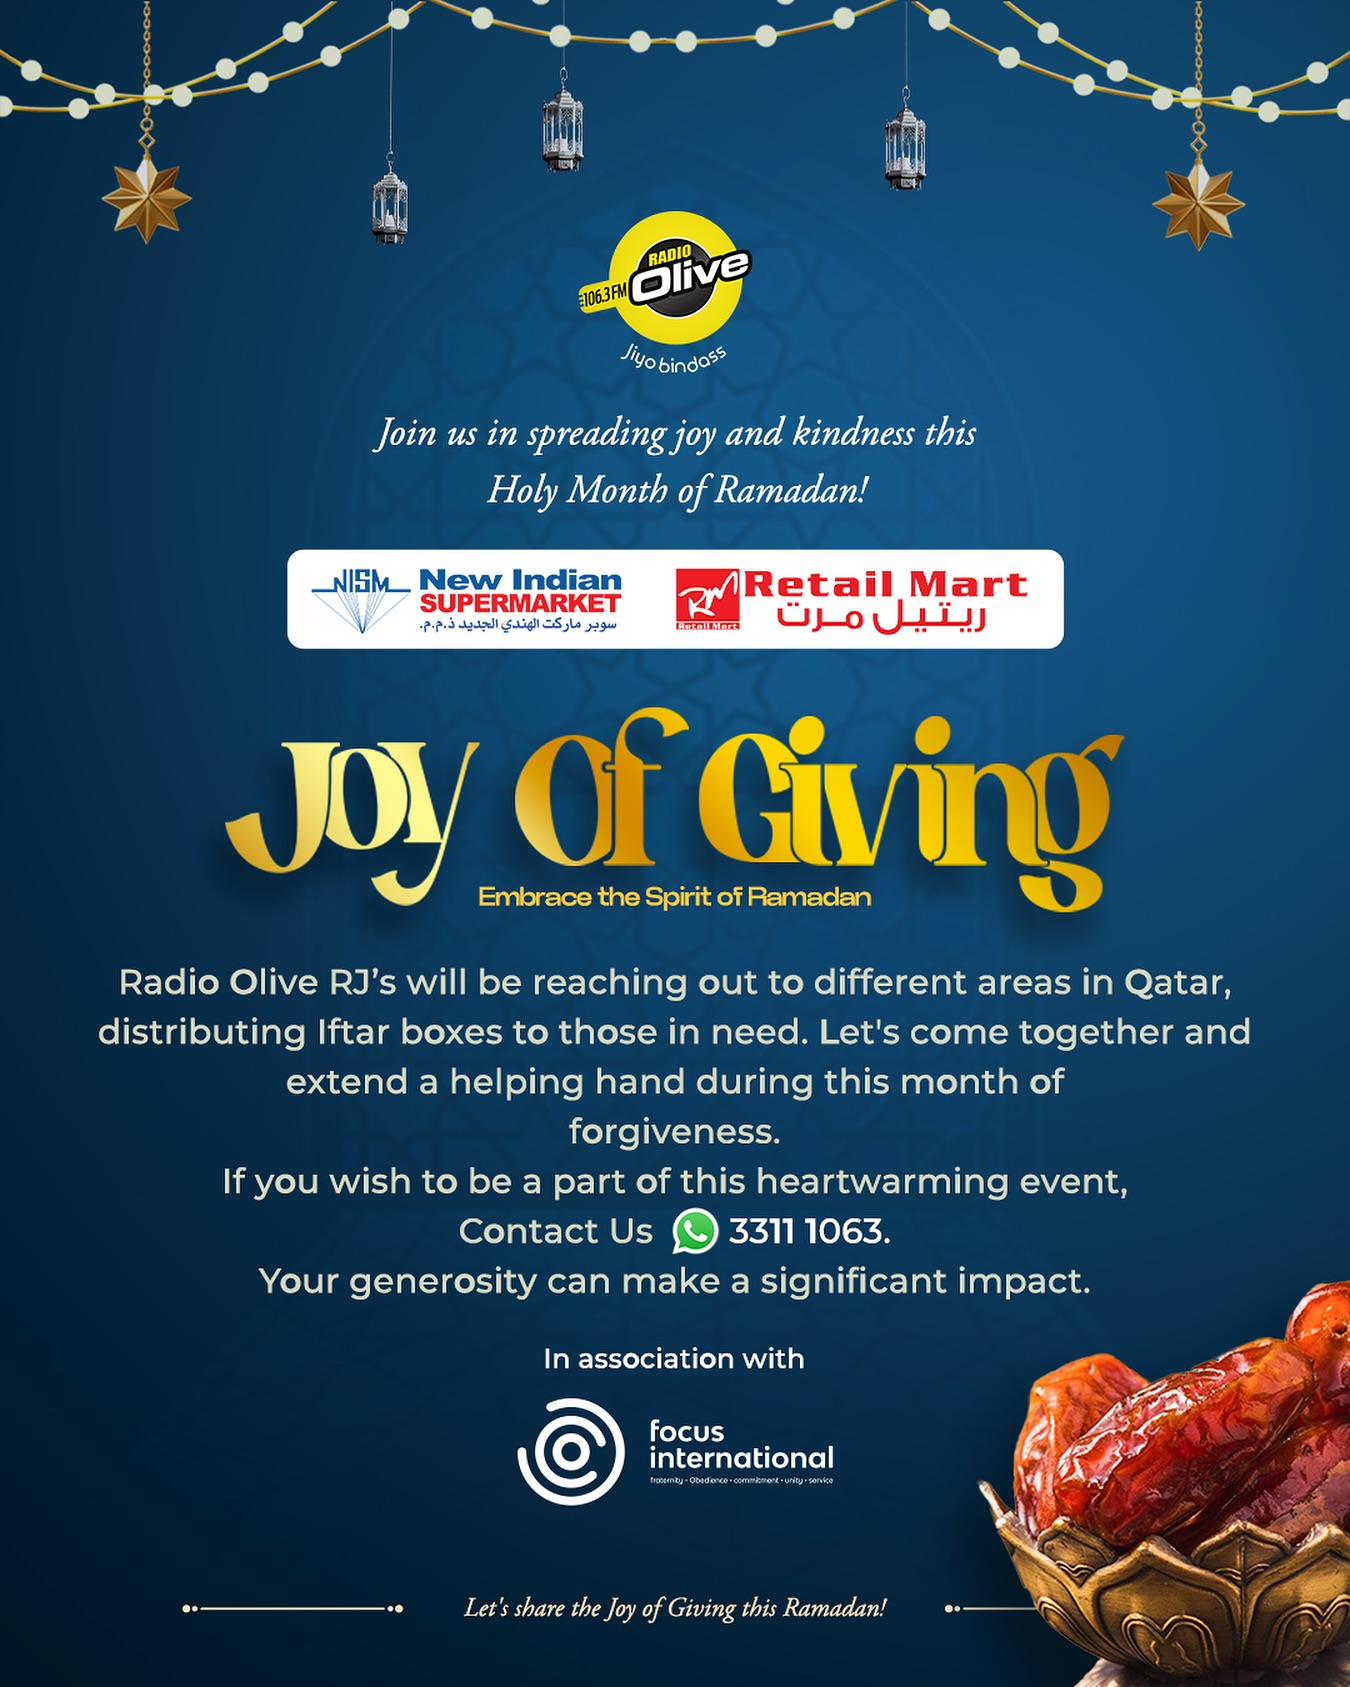 JOIN US IN SPREADING JOY THIS RAMADAN WITH OUR 'JOY OF GIVING' INITIATIVE